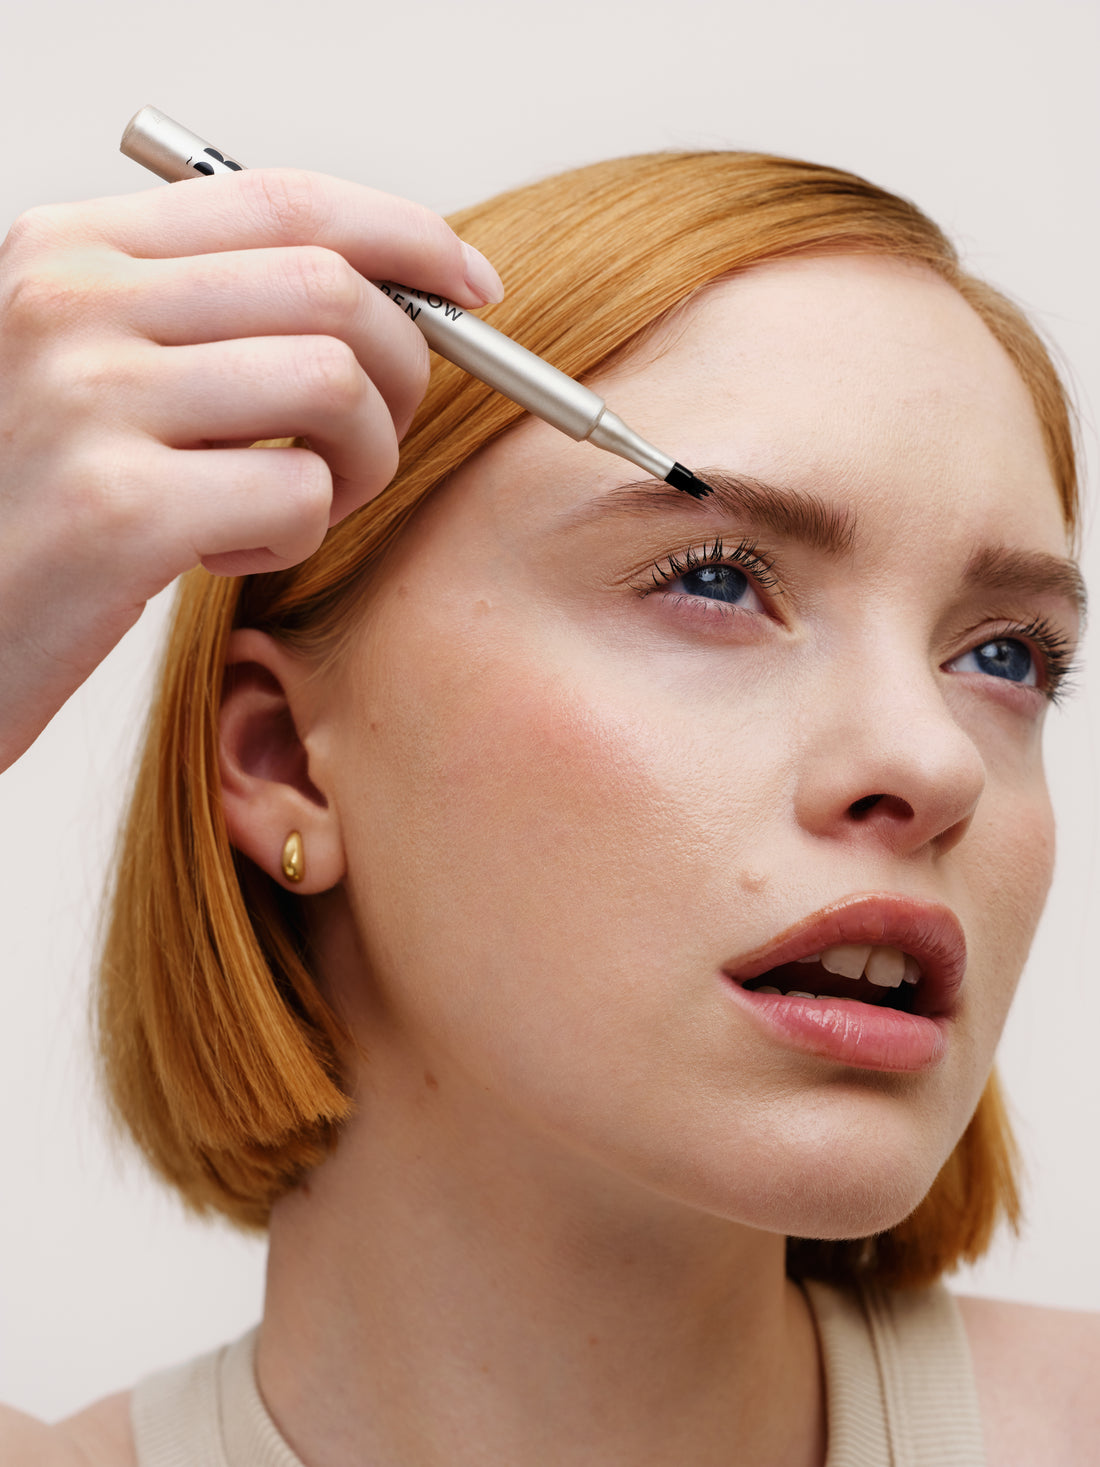 The Eyebrow Pen: The new addition to your brow arsenal